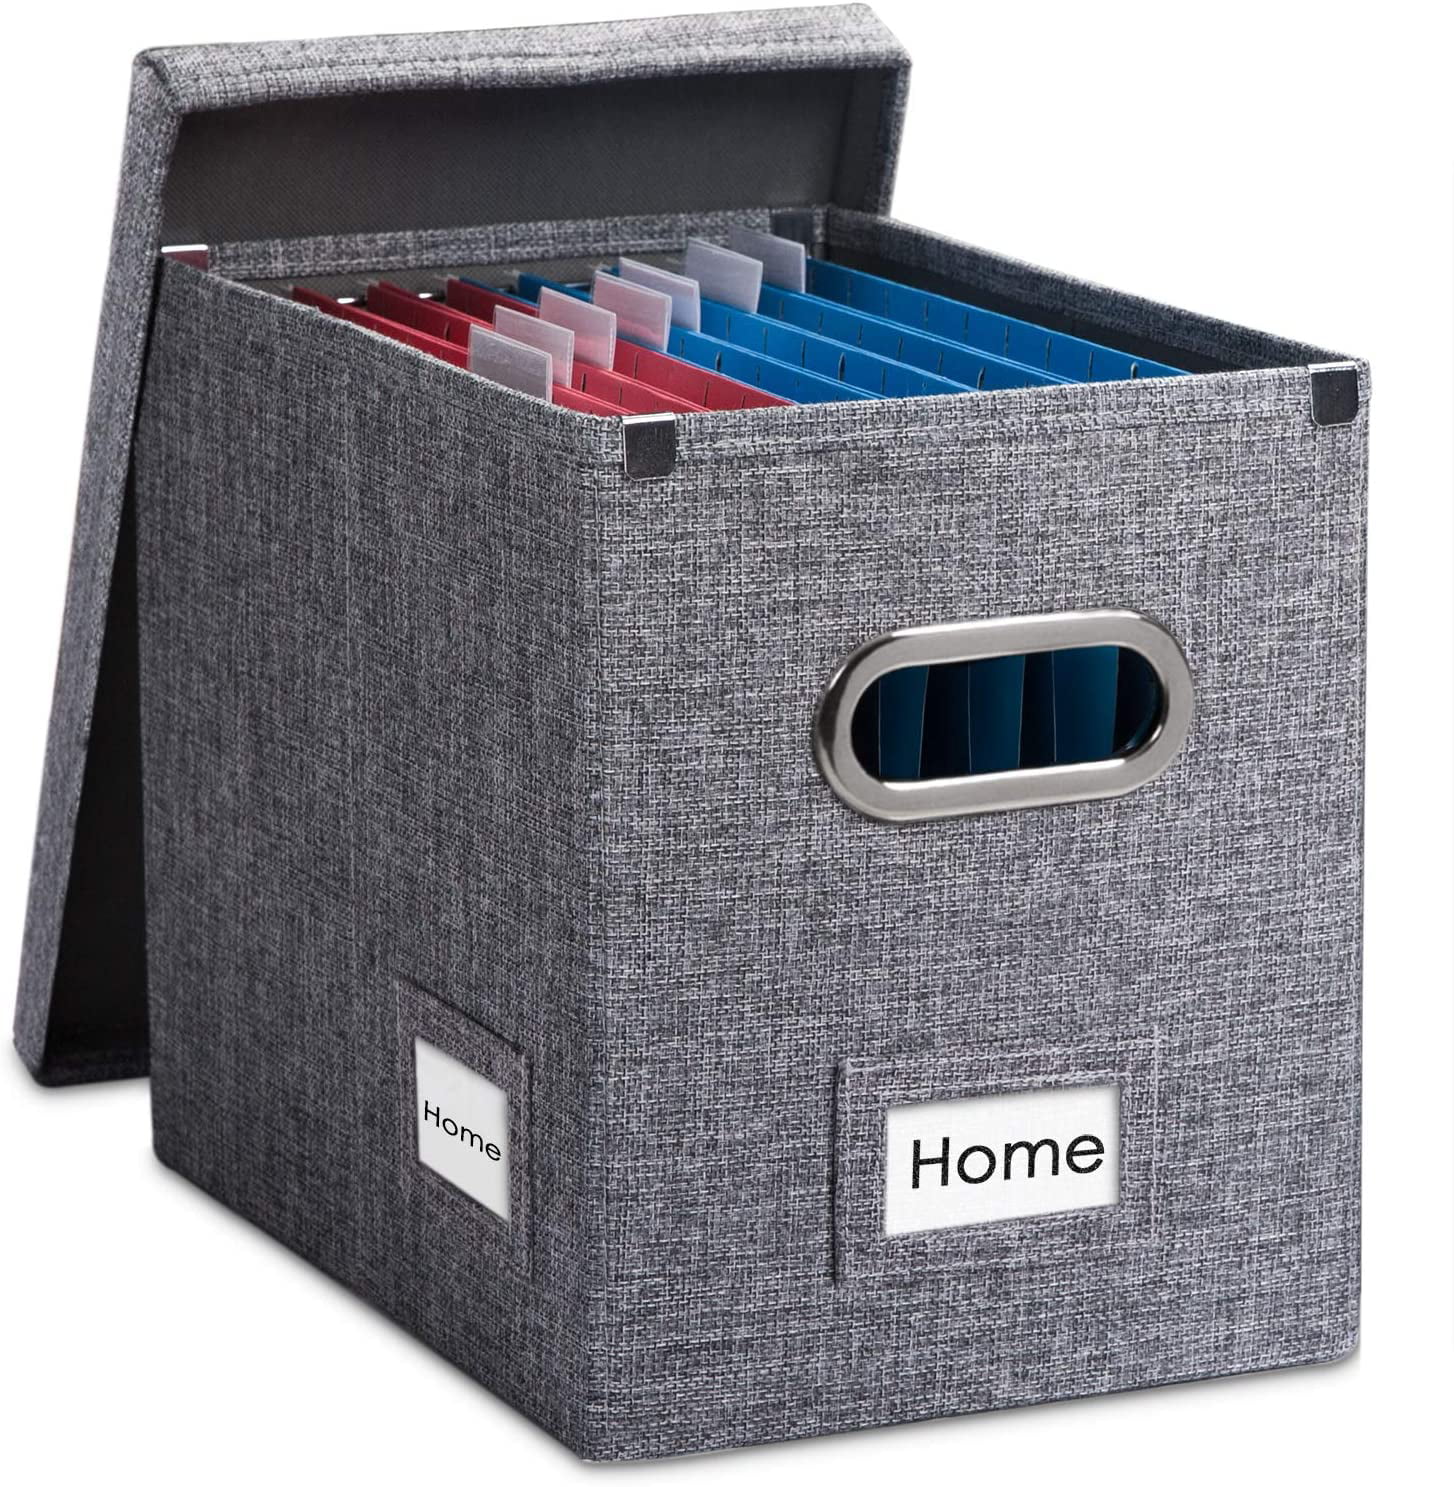 Collapsible File Storage File Folder Organizer s Best Linen File Box Organizer with a Smooth Rail Filing System Paper Organizer Box Hanging File Box Document Organizer 